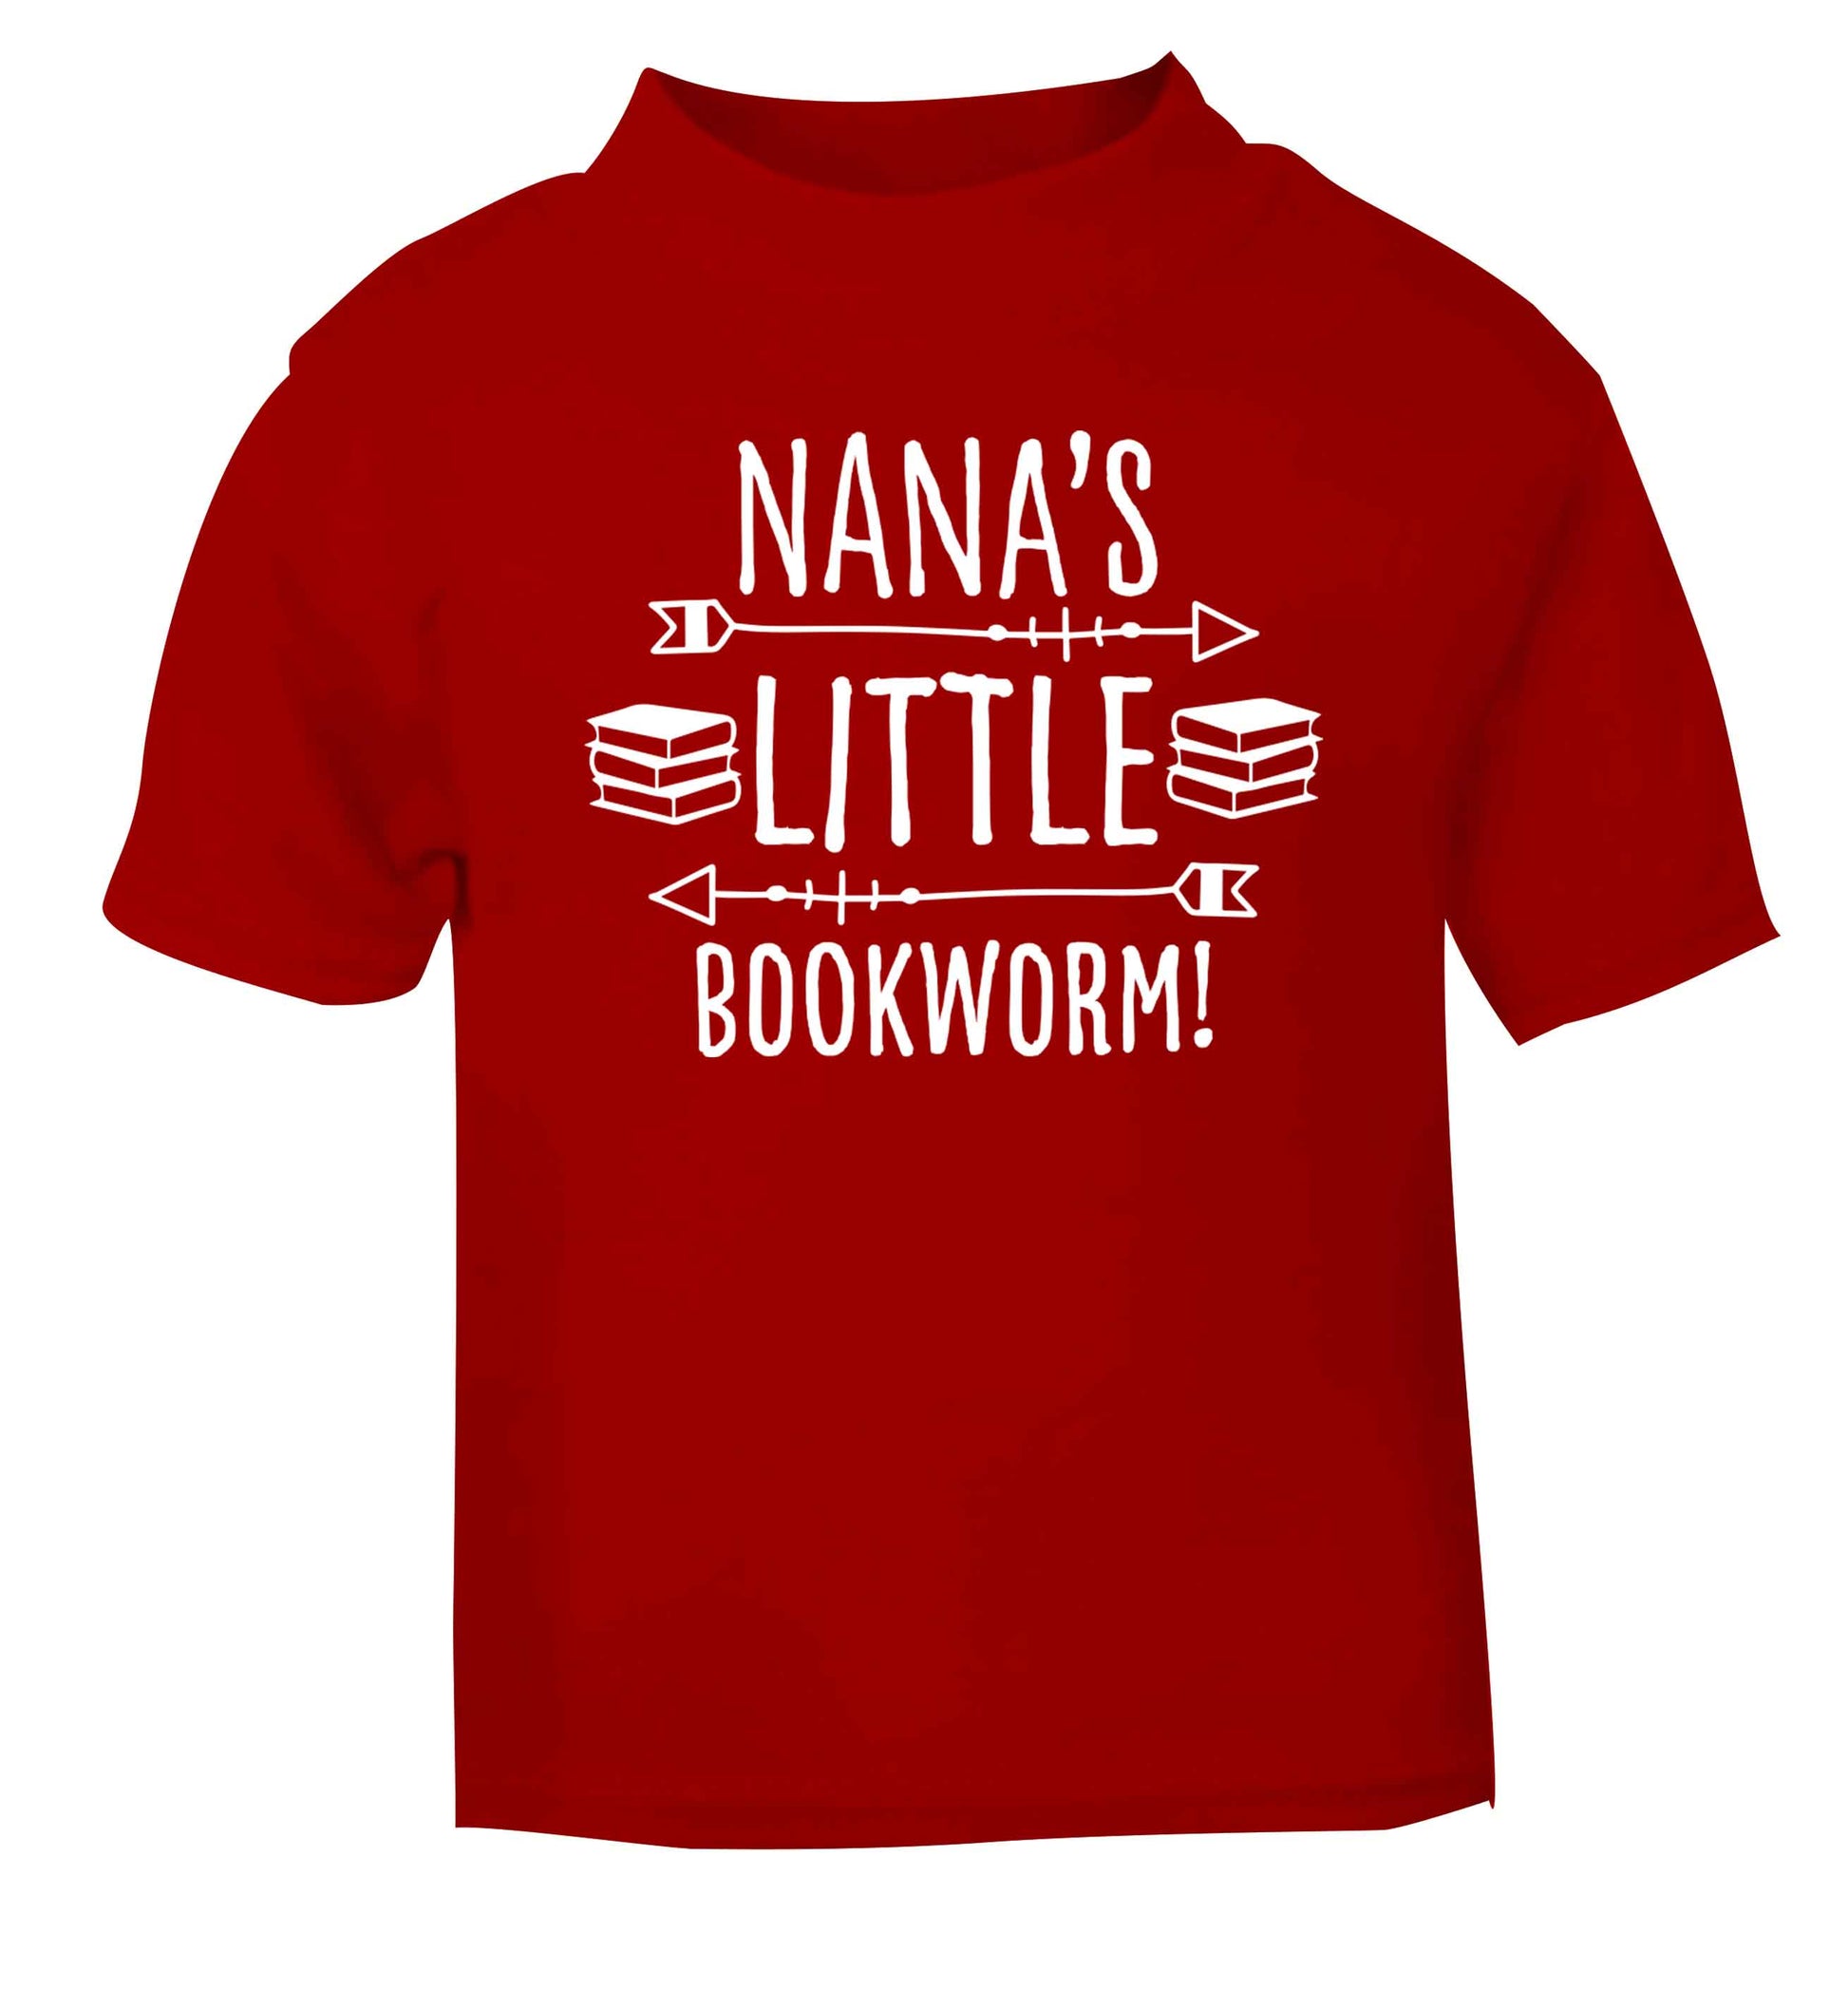 Nana's little bookworm red baby toddler Tshirt 2 Years